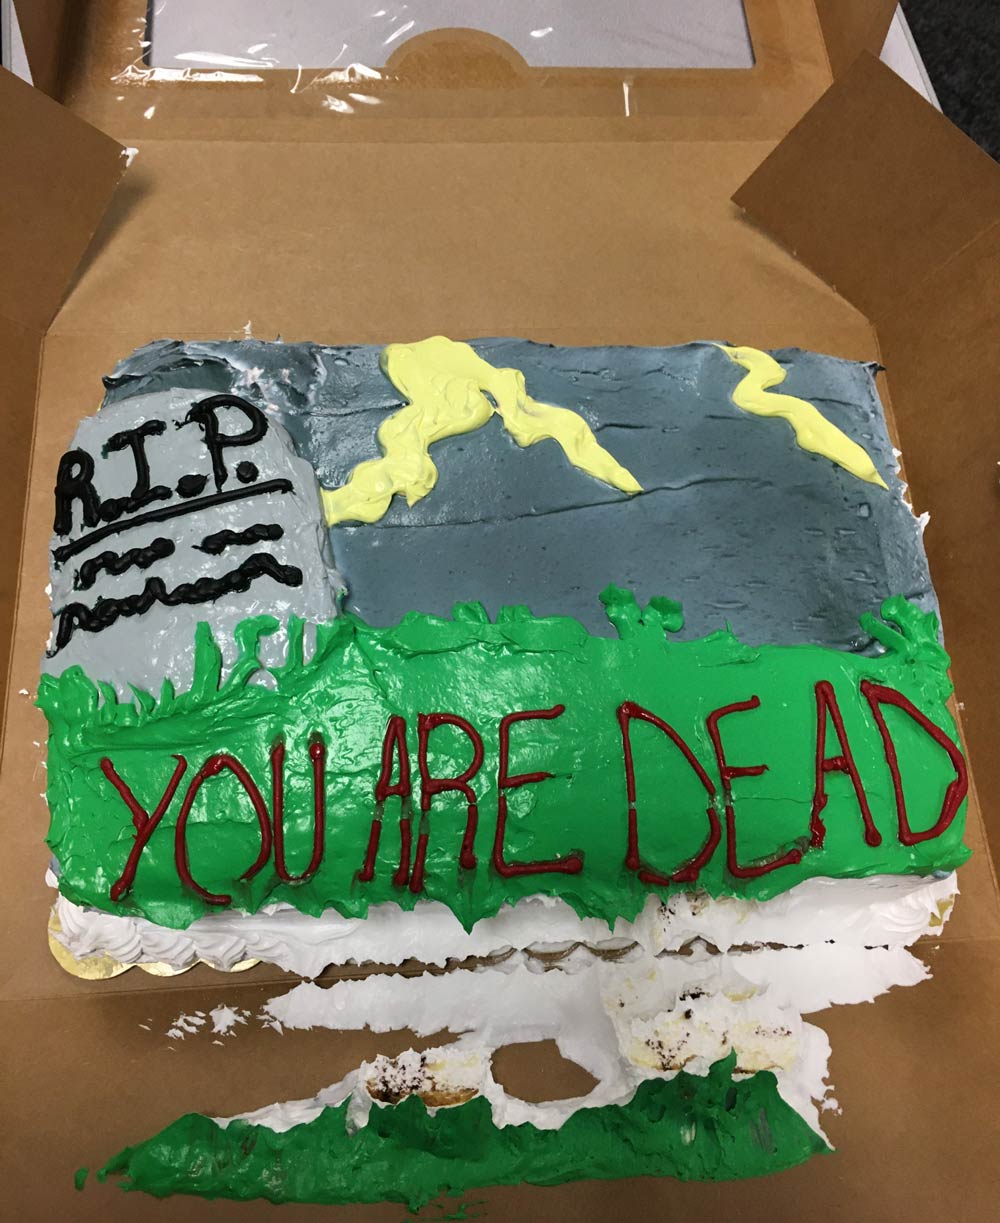 Bought a guy a cake that was leaving for another company. Told them to write "You're dead to us." They ran out of room on the cake and just threatened his life